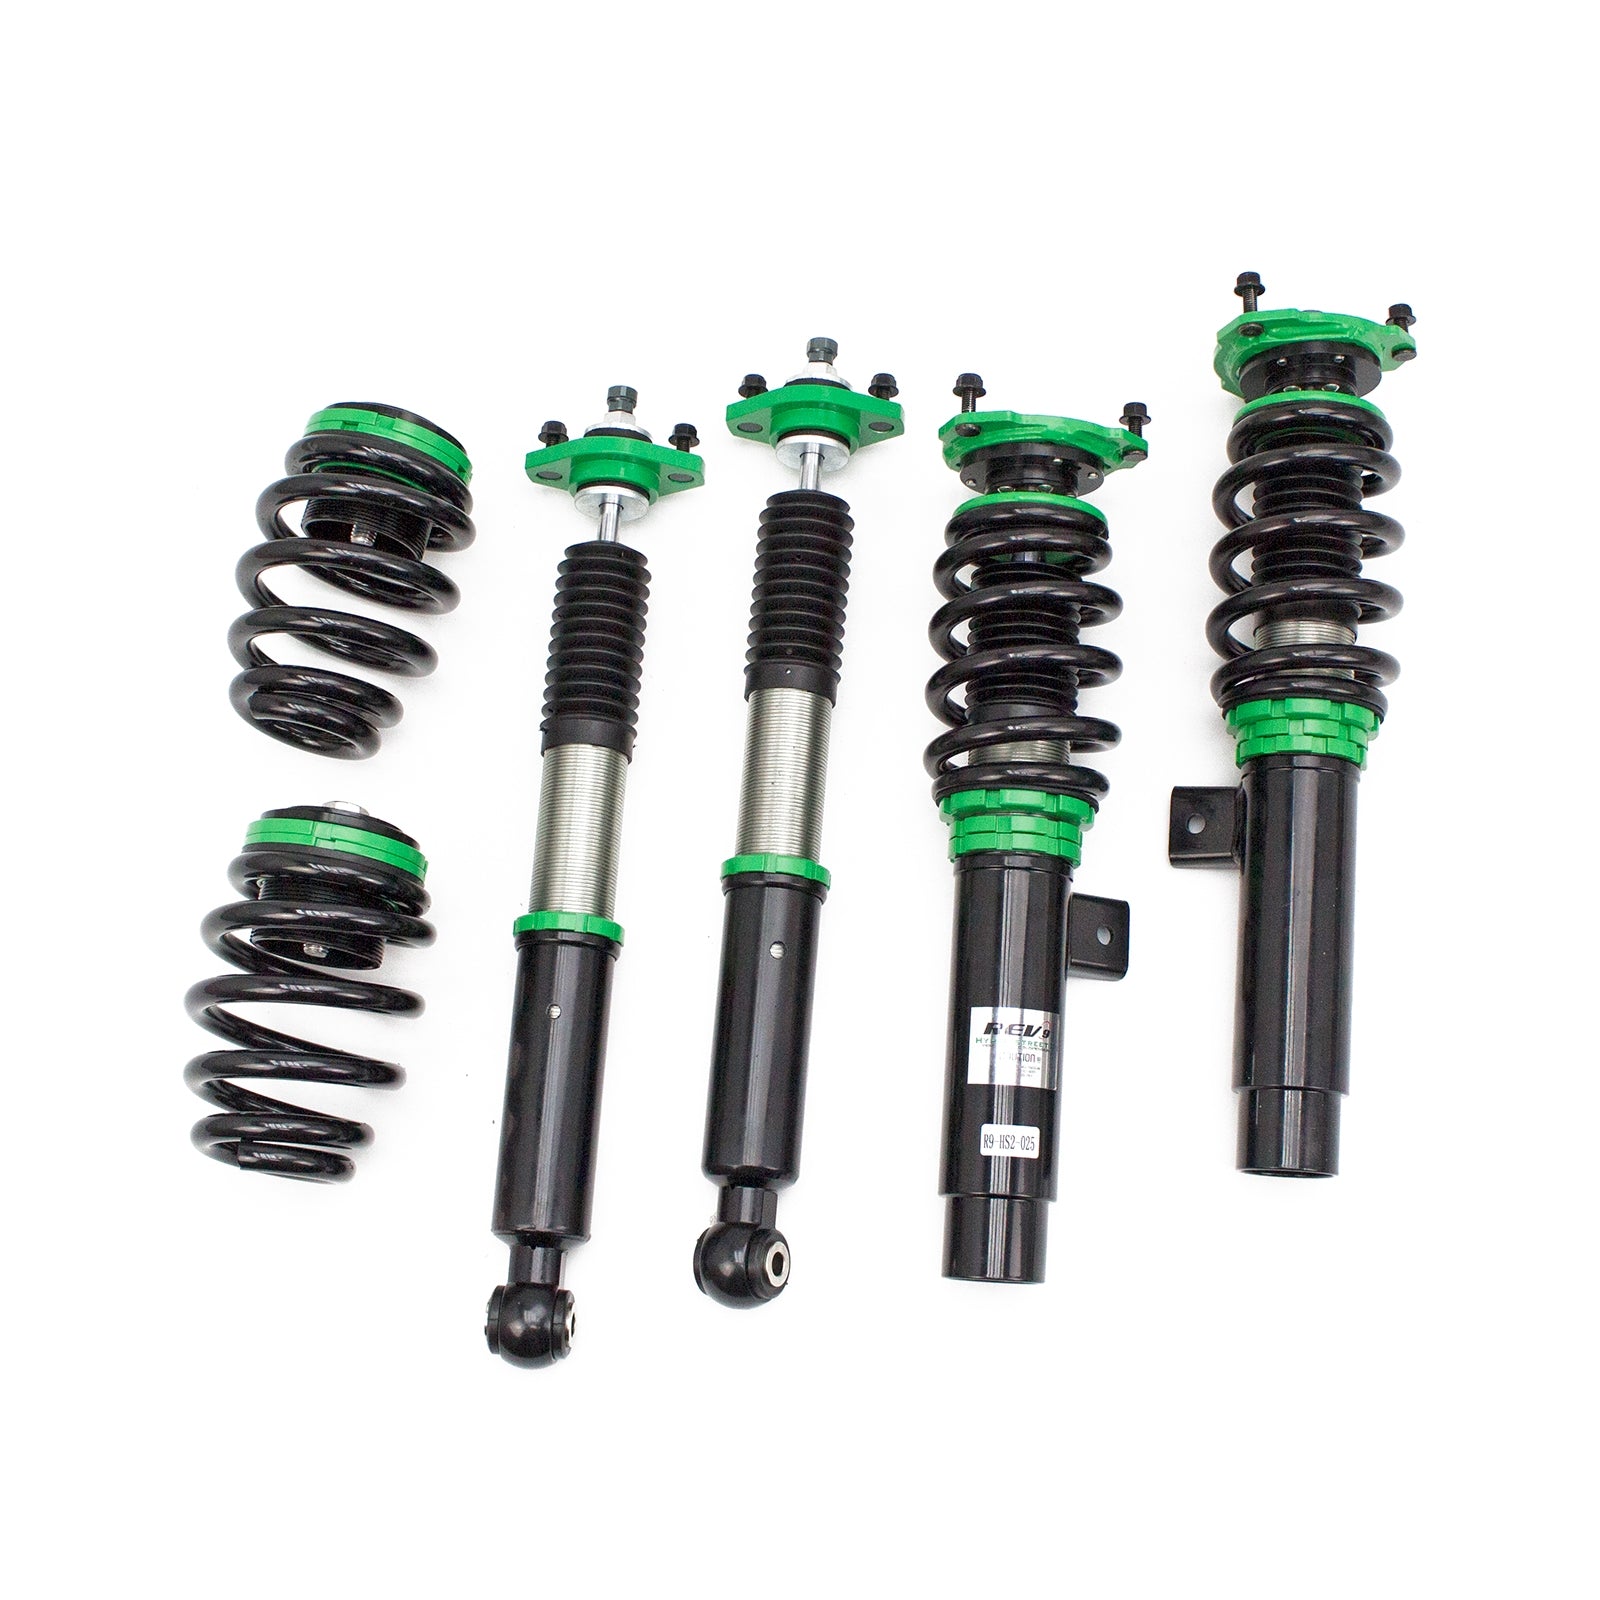 R9-HS2-025, BMW 3-Series(E46) RWD 1999-05 Hyper-Street II Coilover Suspension Lowering Kit, Mono-Tube Shock w/ 32 Click Rebound Setting, Full Length Adjustable